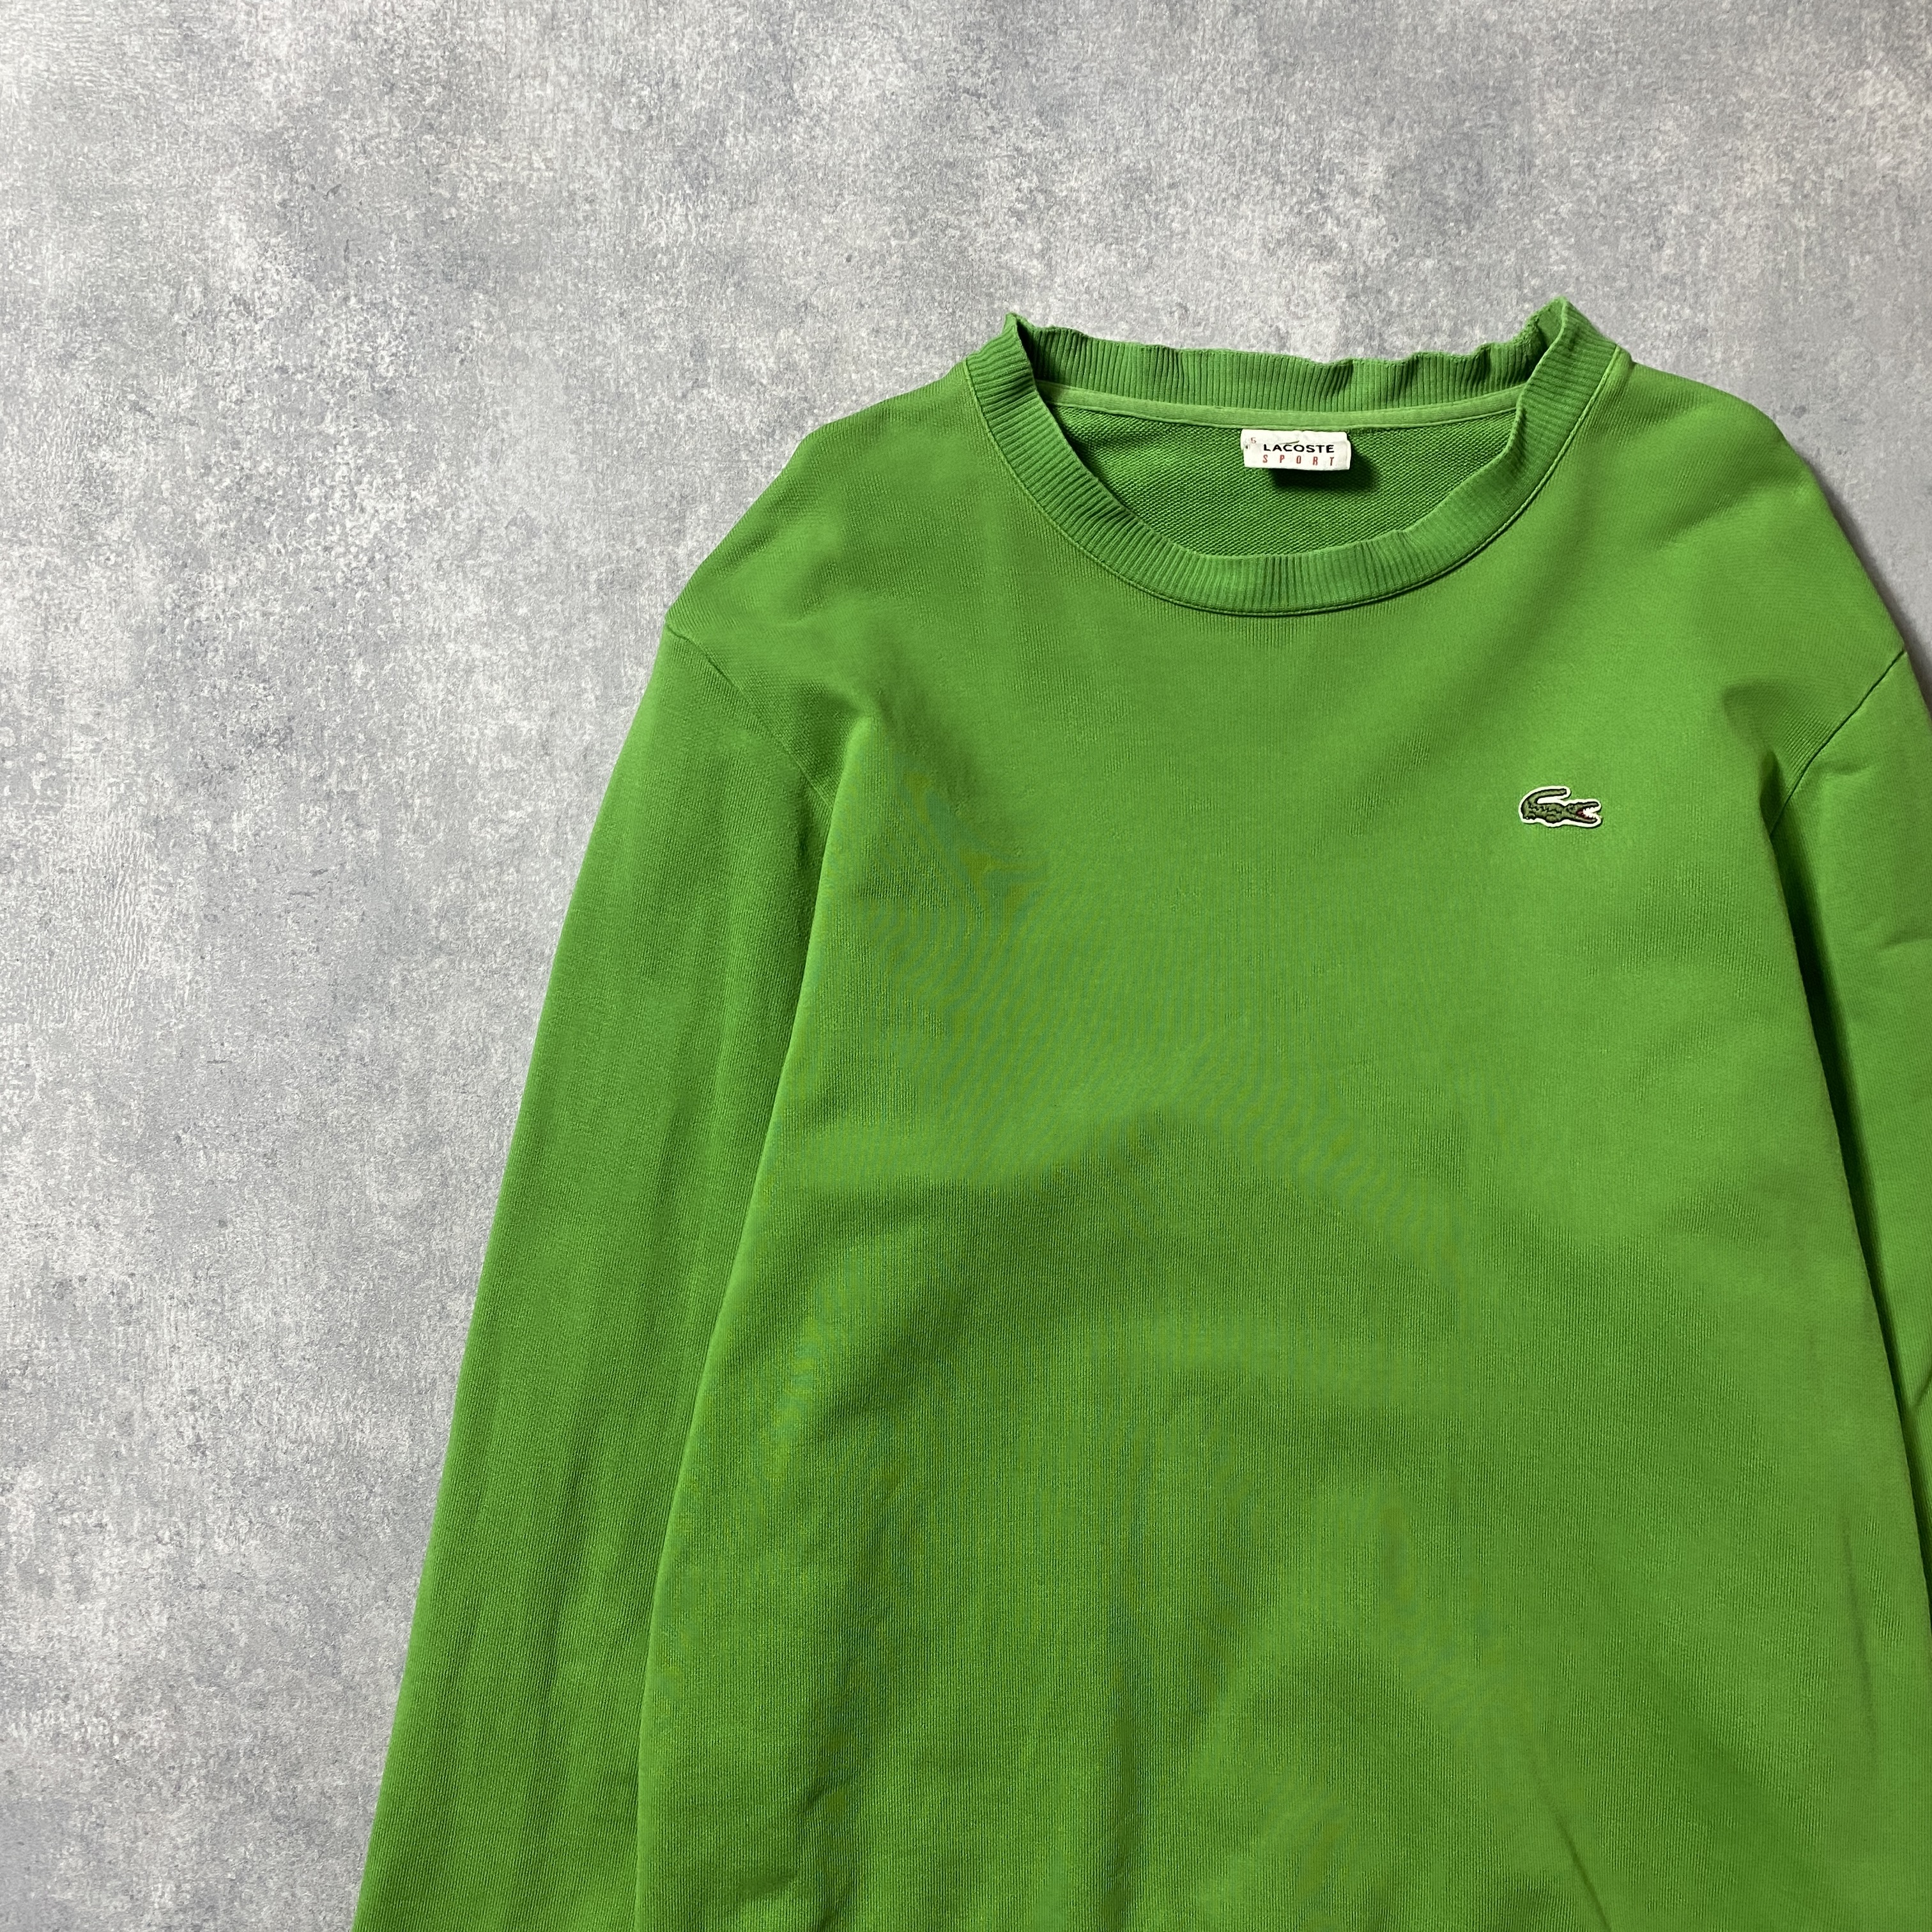 70s vintage LACOSTE スウェット made in France フララコ 70年代 